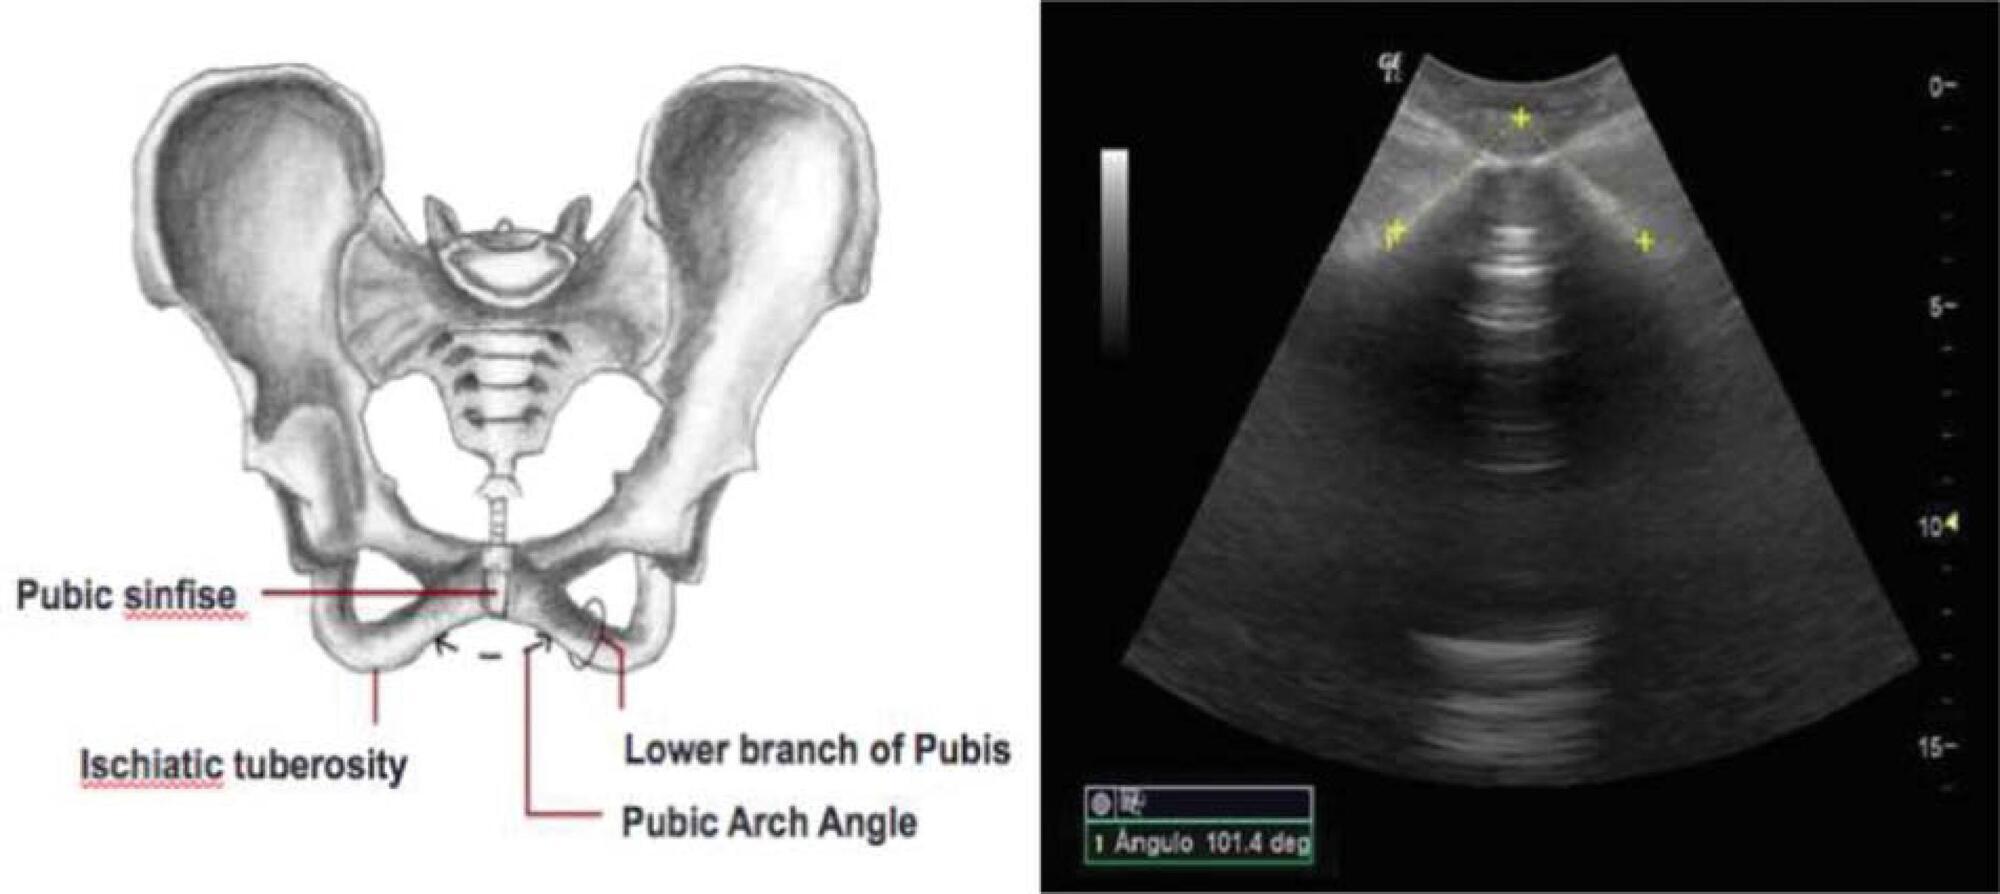 Pubic Arch Angle Measurement by Transperineal Ultrasonography: A Prospective Cross-Sectional Study